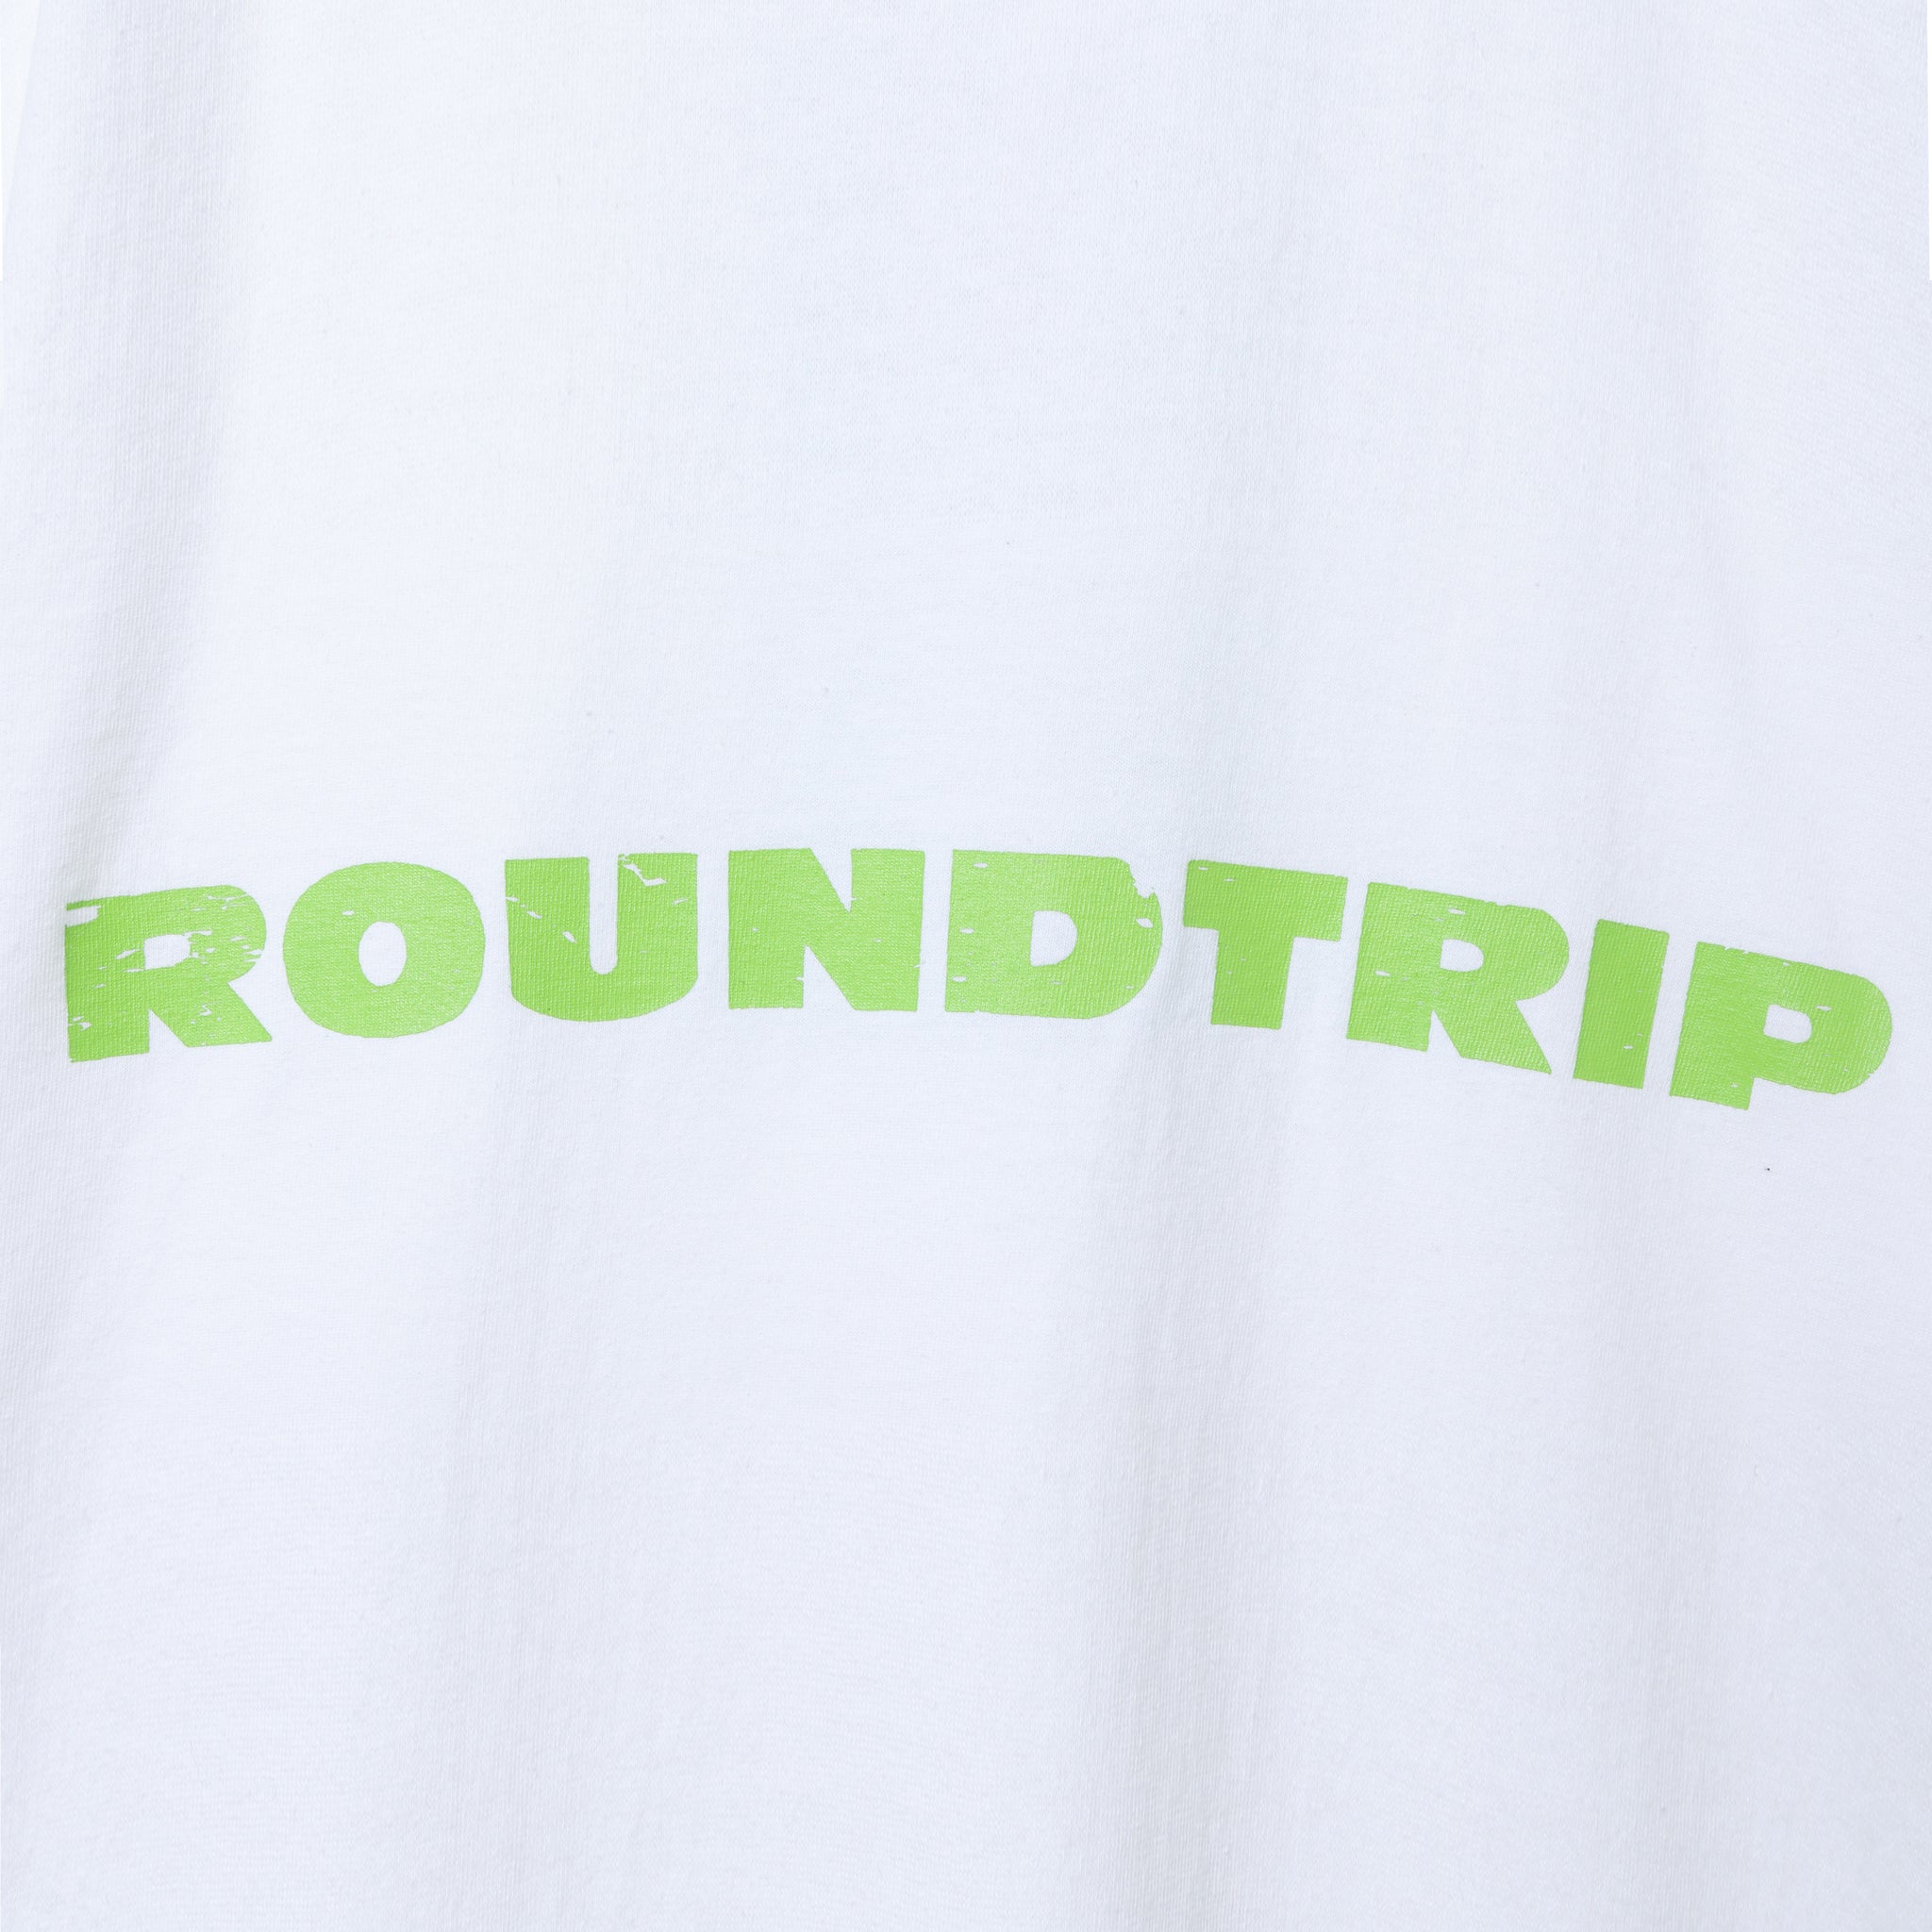 DUSTCELL ROUND TRIP Tシャツ | ochge.org